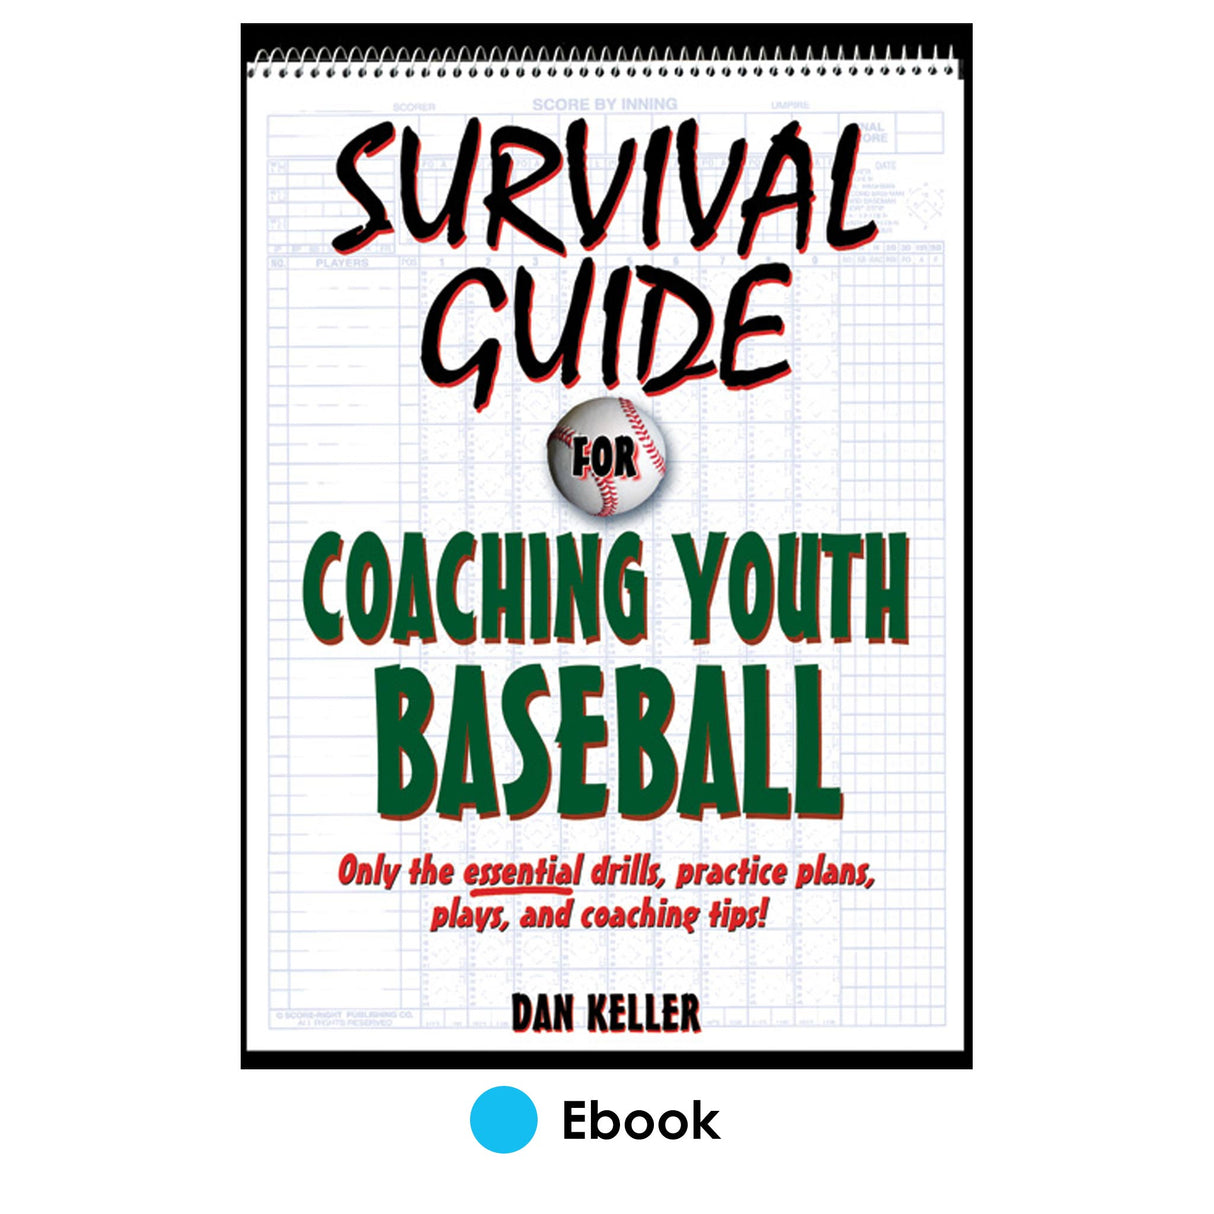 Survival Guide for Coaching Youth Baseball PDF